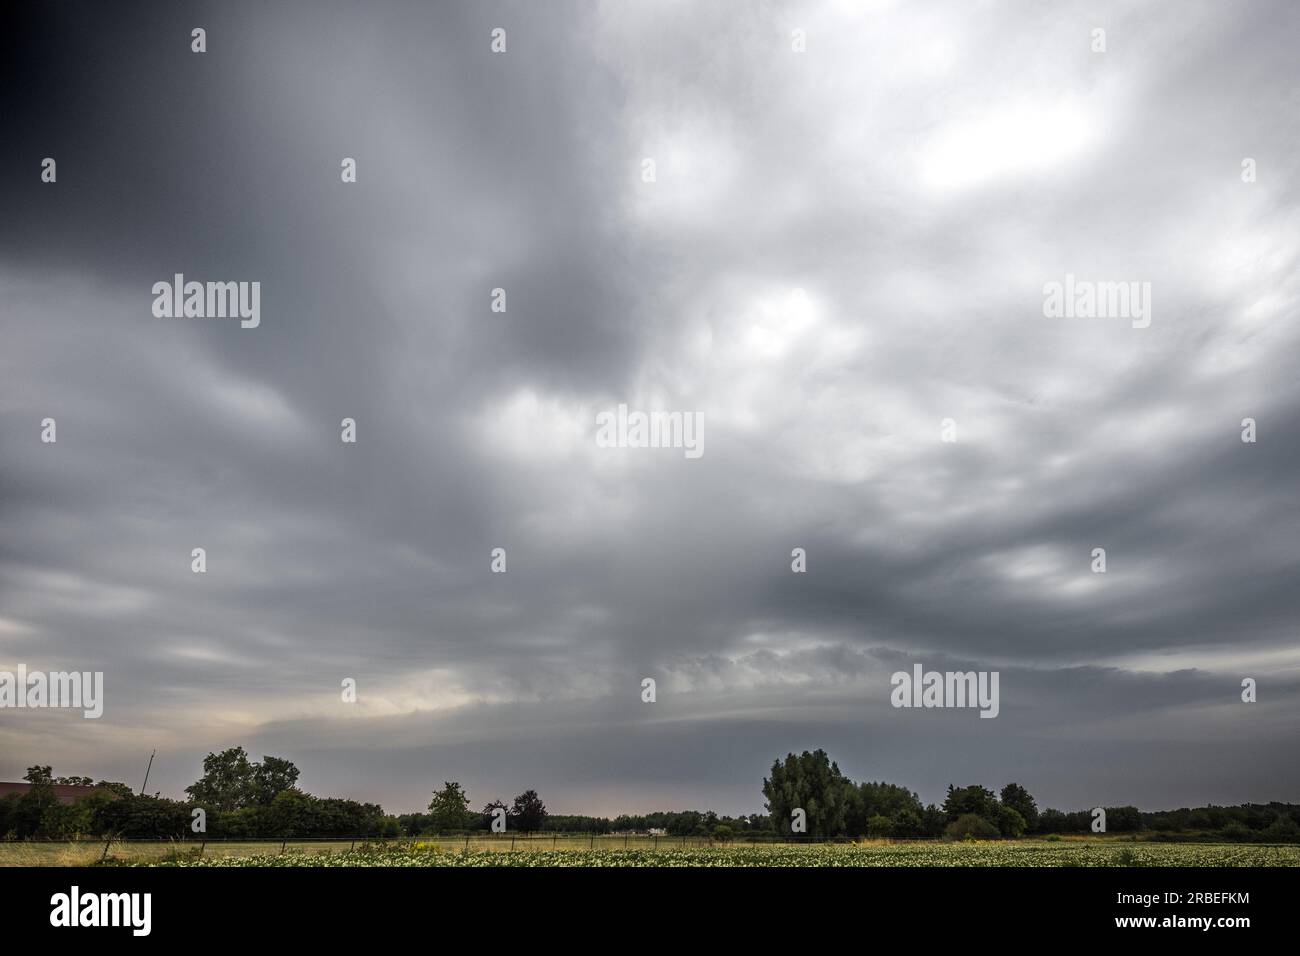 SOMEREN - An approaching thunderstorm in Someren. After the tropical heat of the weekend, the KNMI has declared code orange for extreme weather conditions again. ANP ROB ENGELAAR netherlands out - belgium out Stock Photo